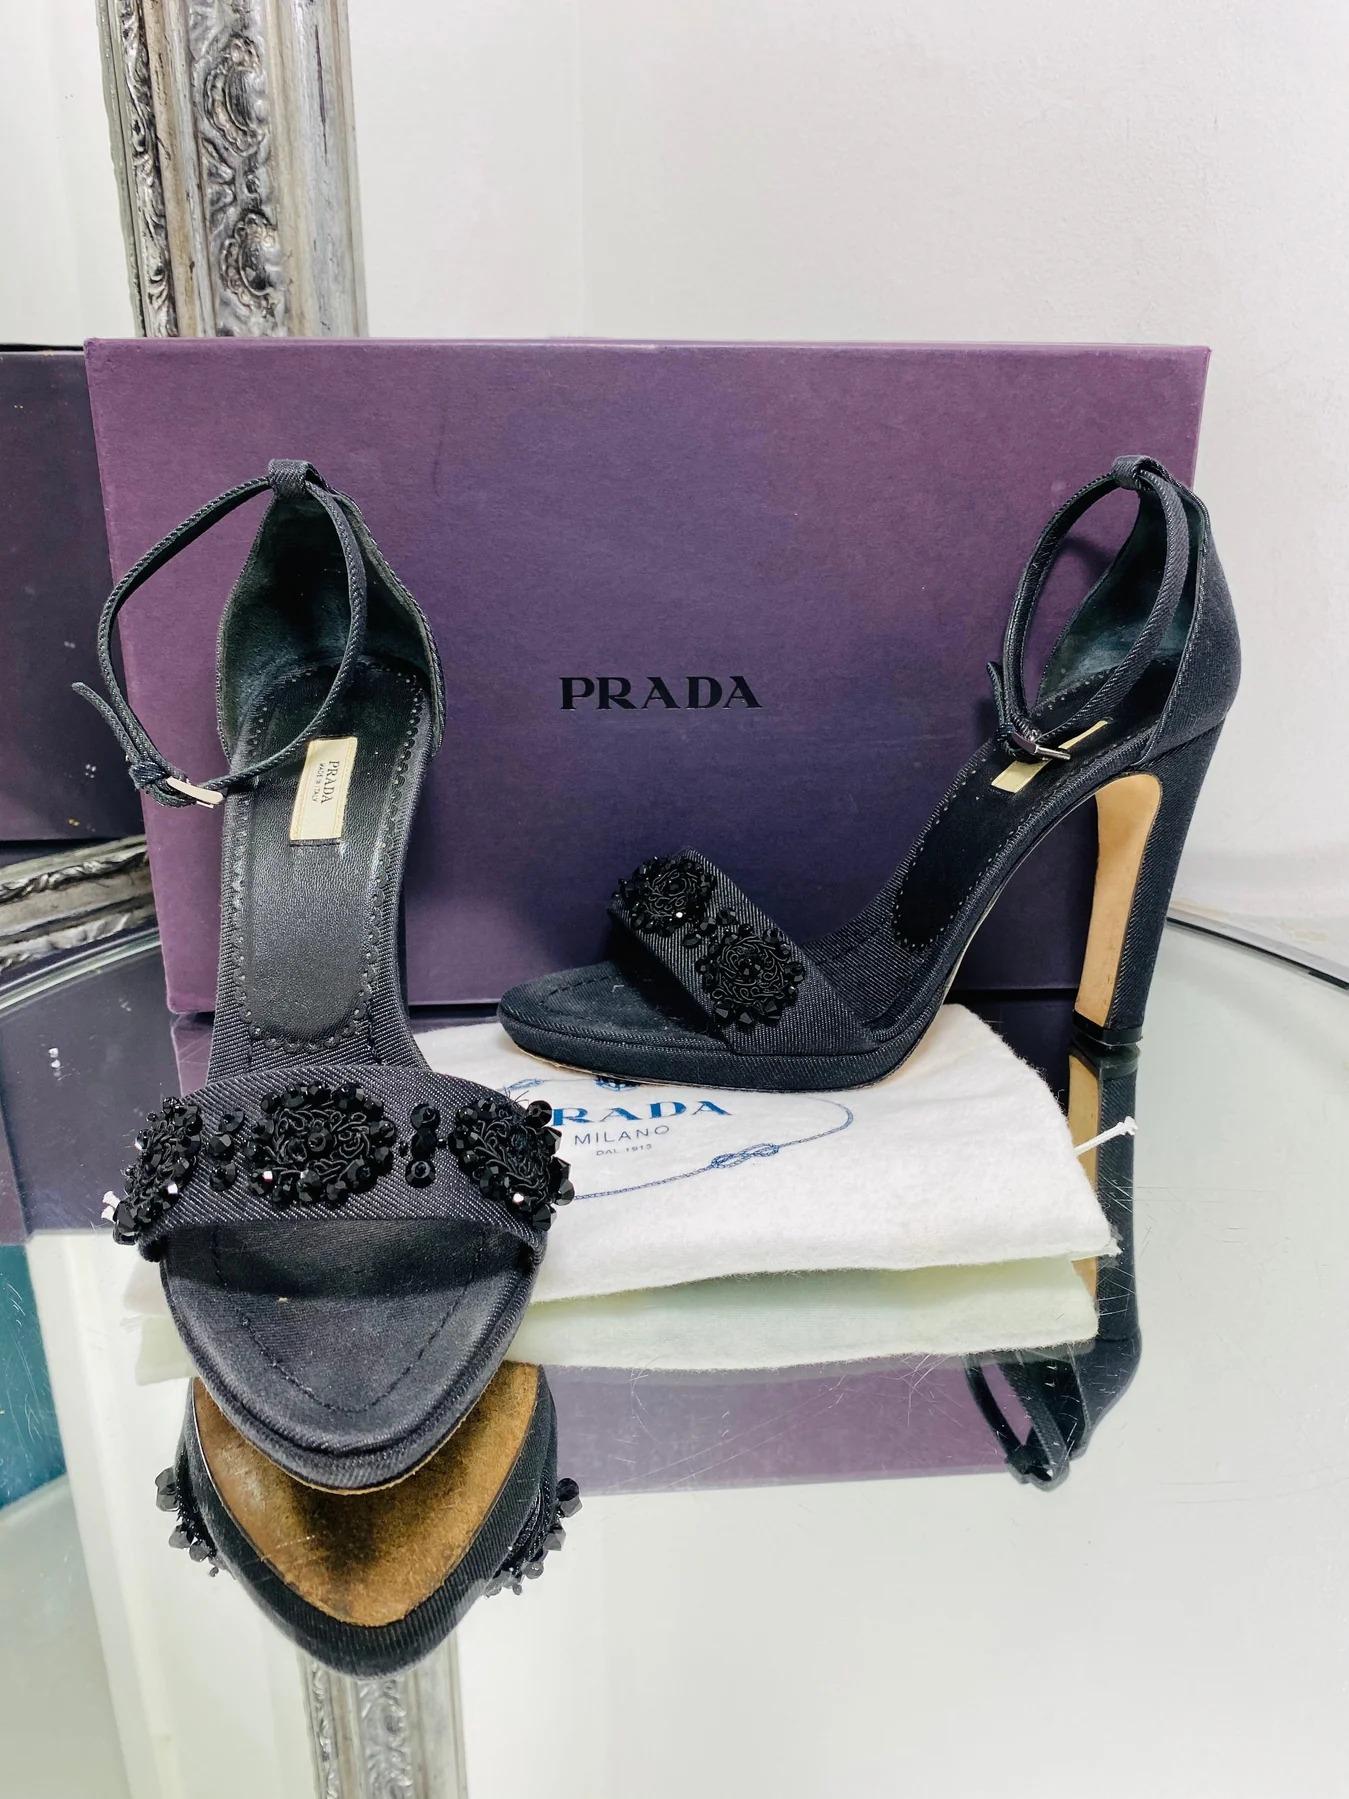 Prada Calzature Donna Heels Covered with Denim

Designed with black crystal embellishment to the strap. Featuring ankle buckle strap and 11cm.

Additional information:
Size – 38
Condition – Very Good
Comes with- Box, 2 Dust Bags